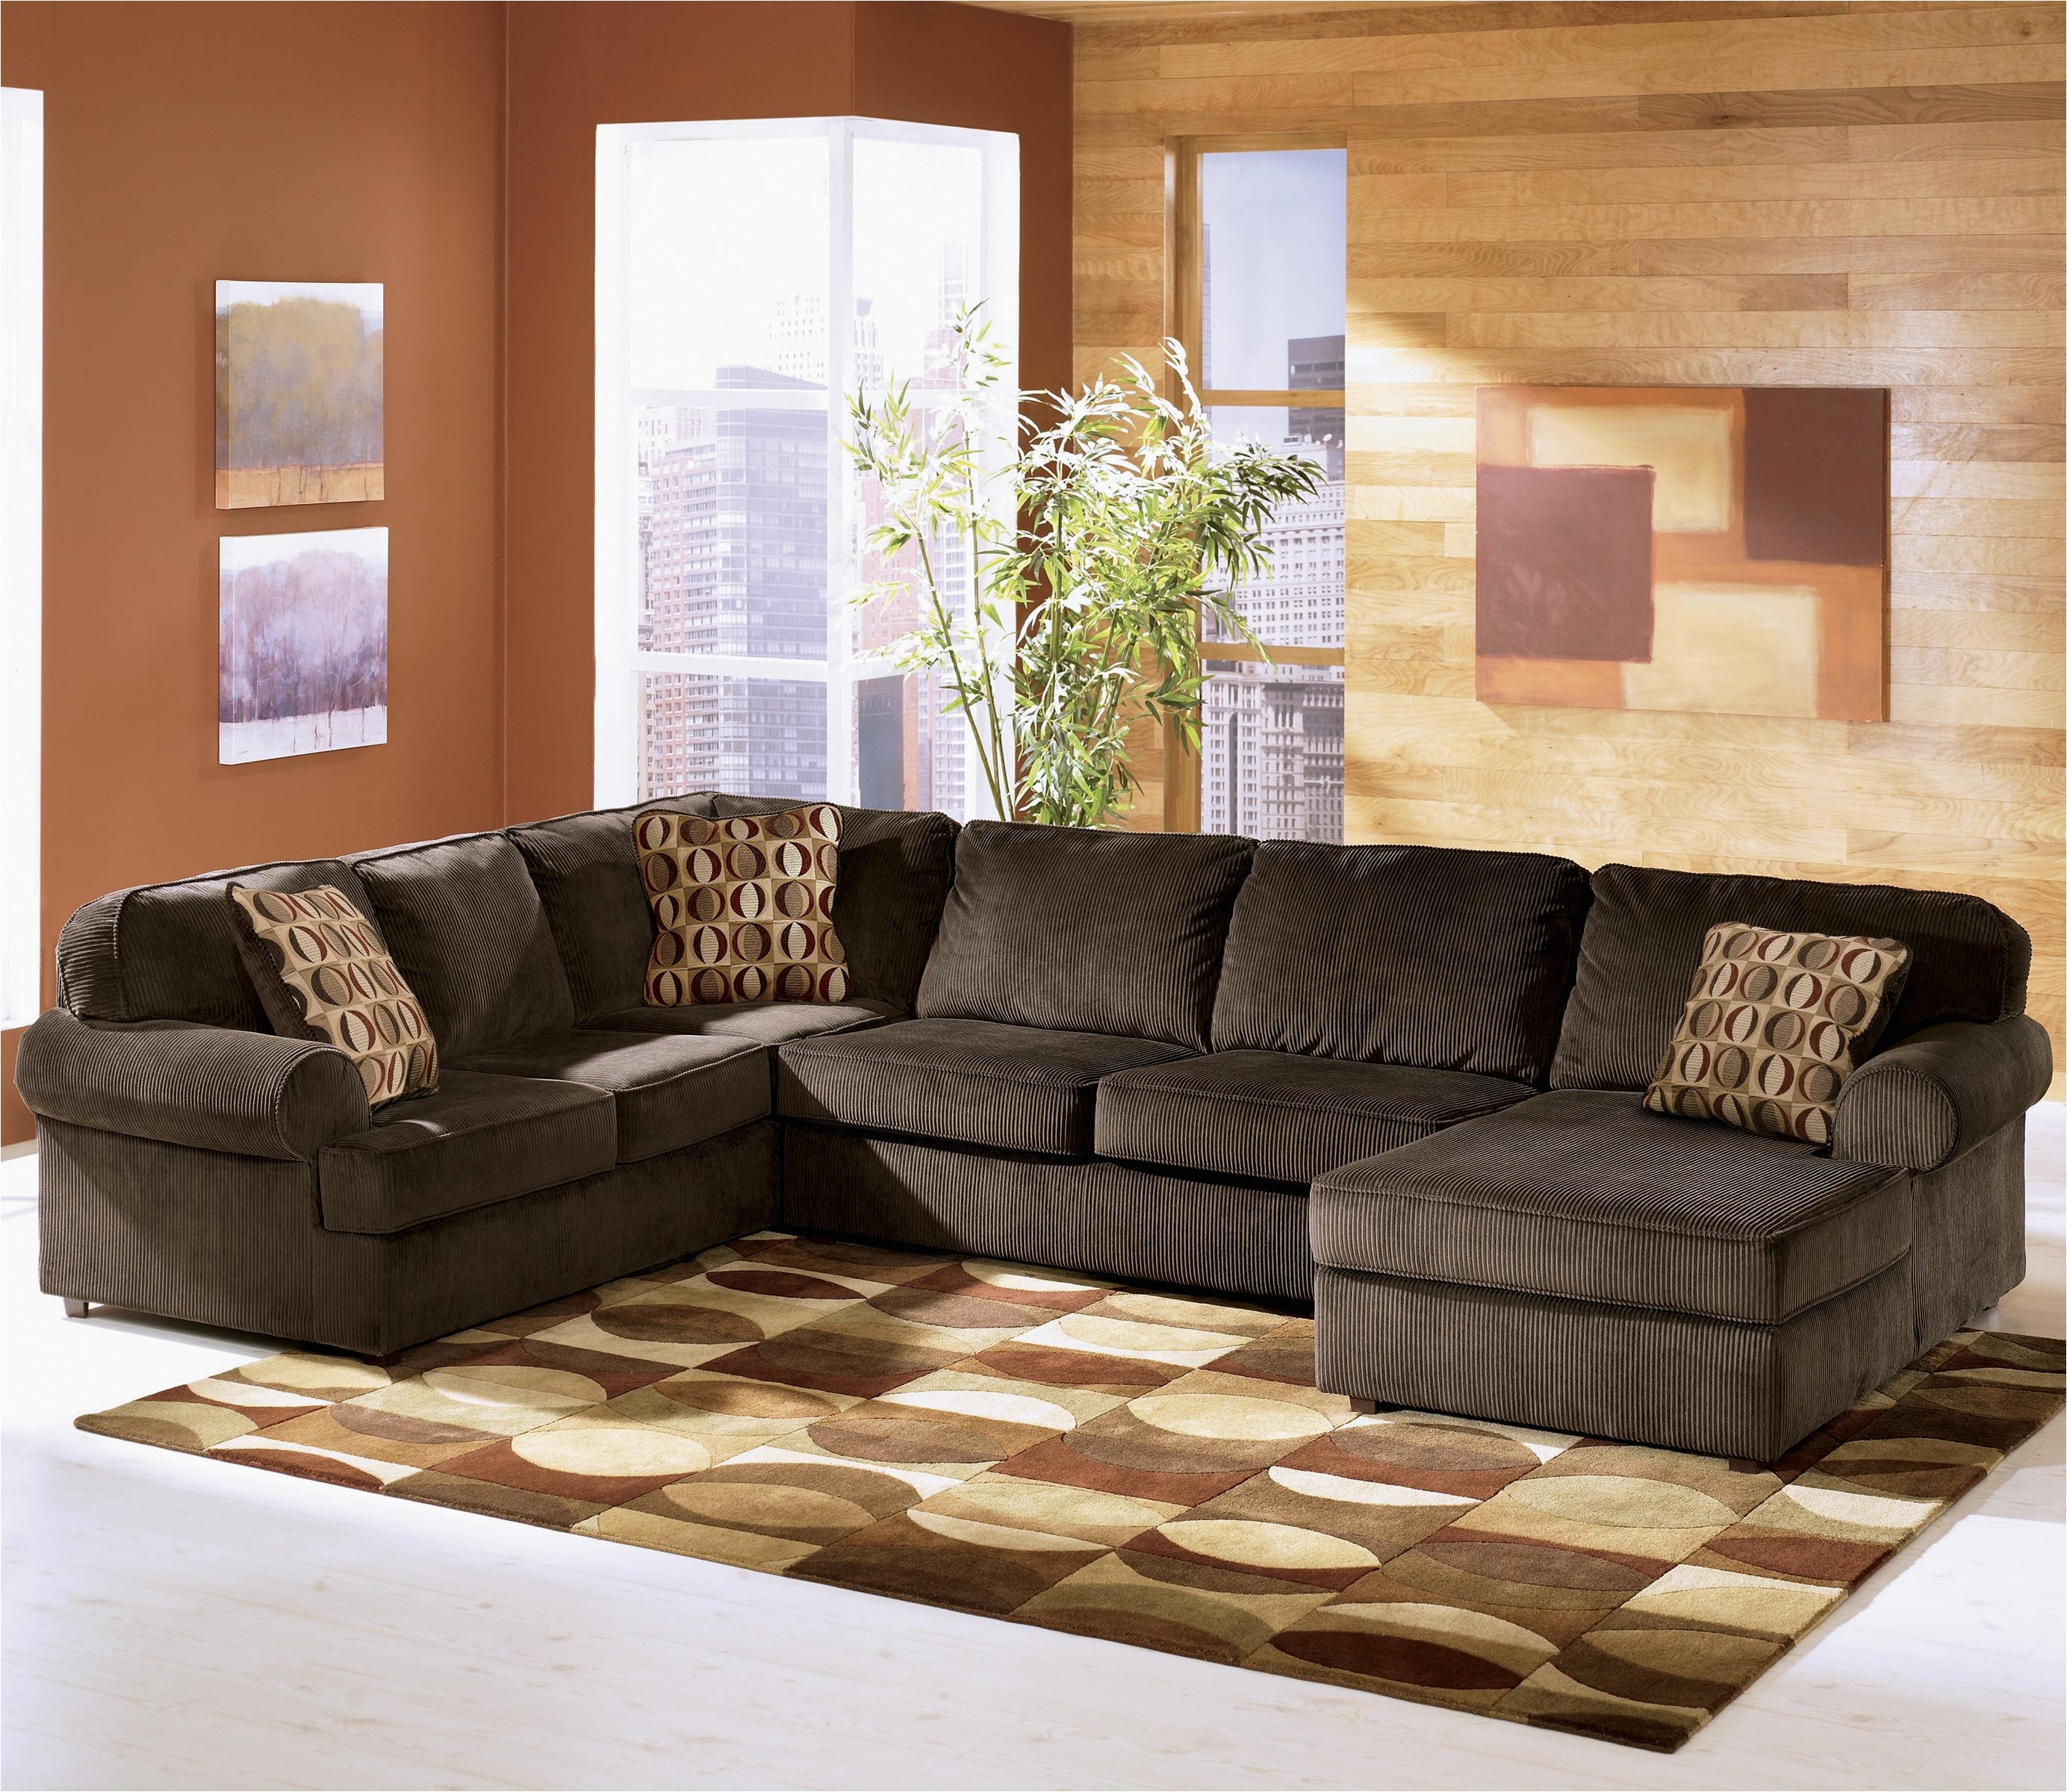 ashley furniture brown couch new ashley furniture tufted sofa sofa photograph of ashley furniture brown couch